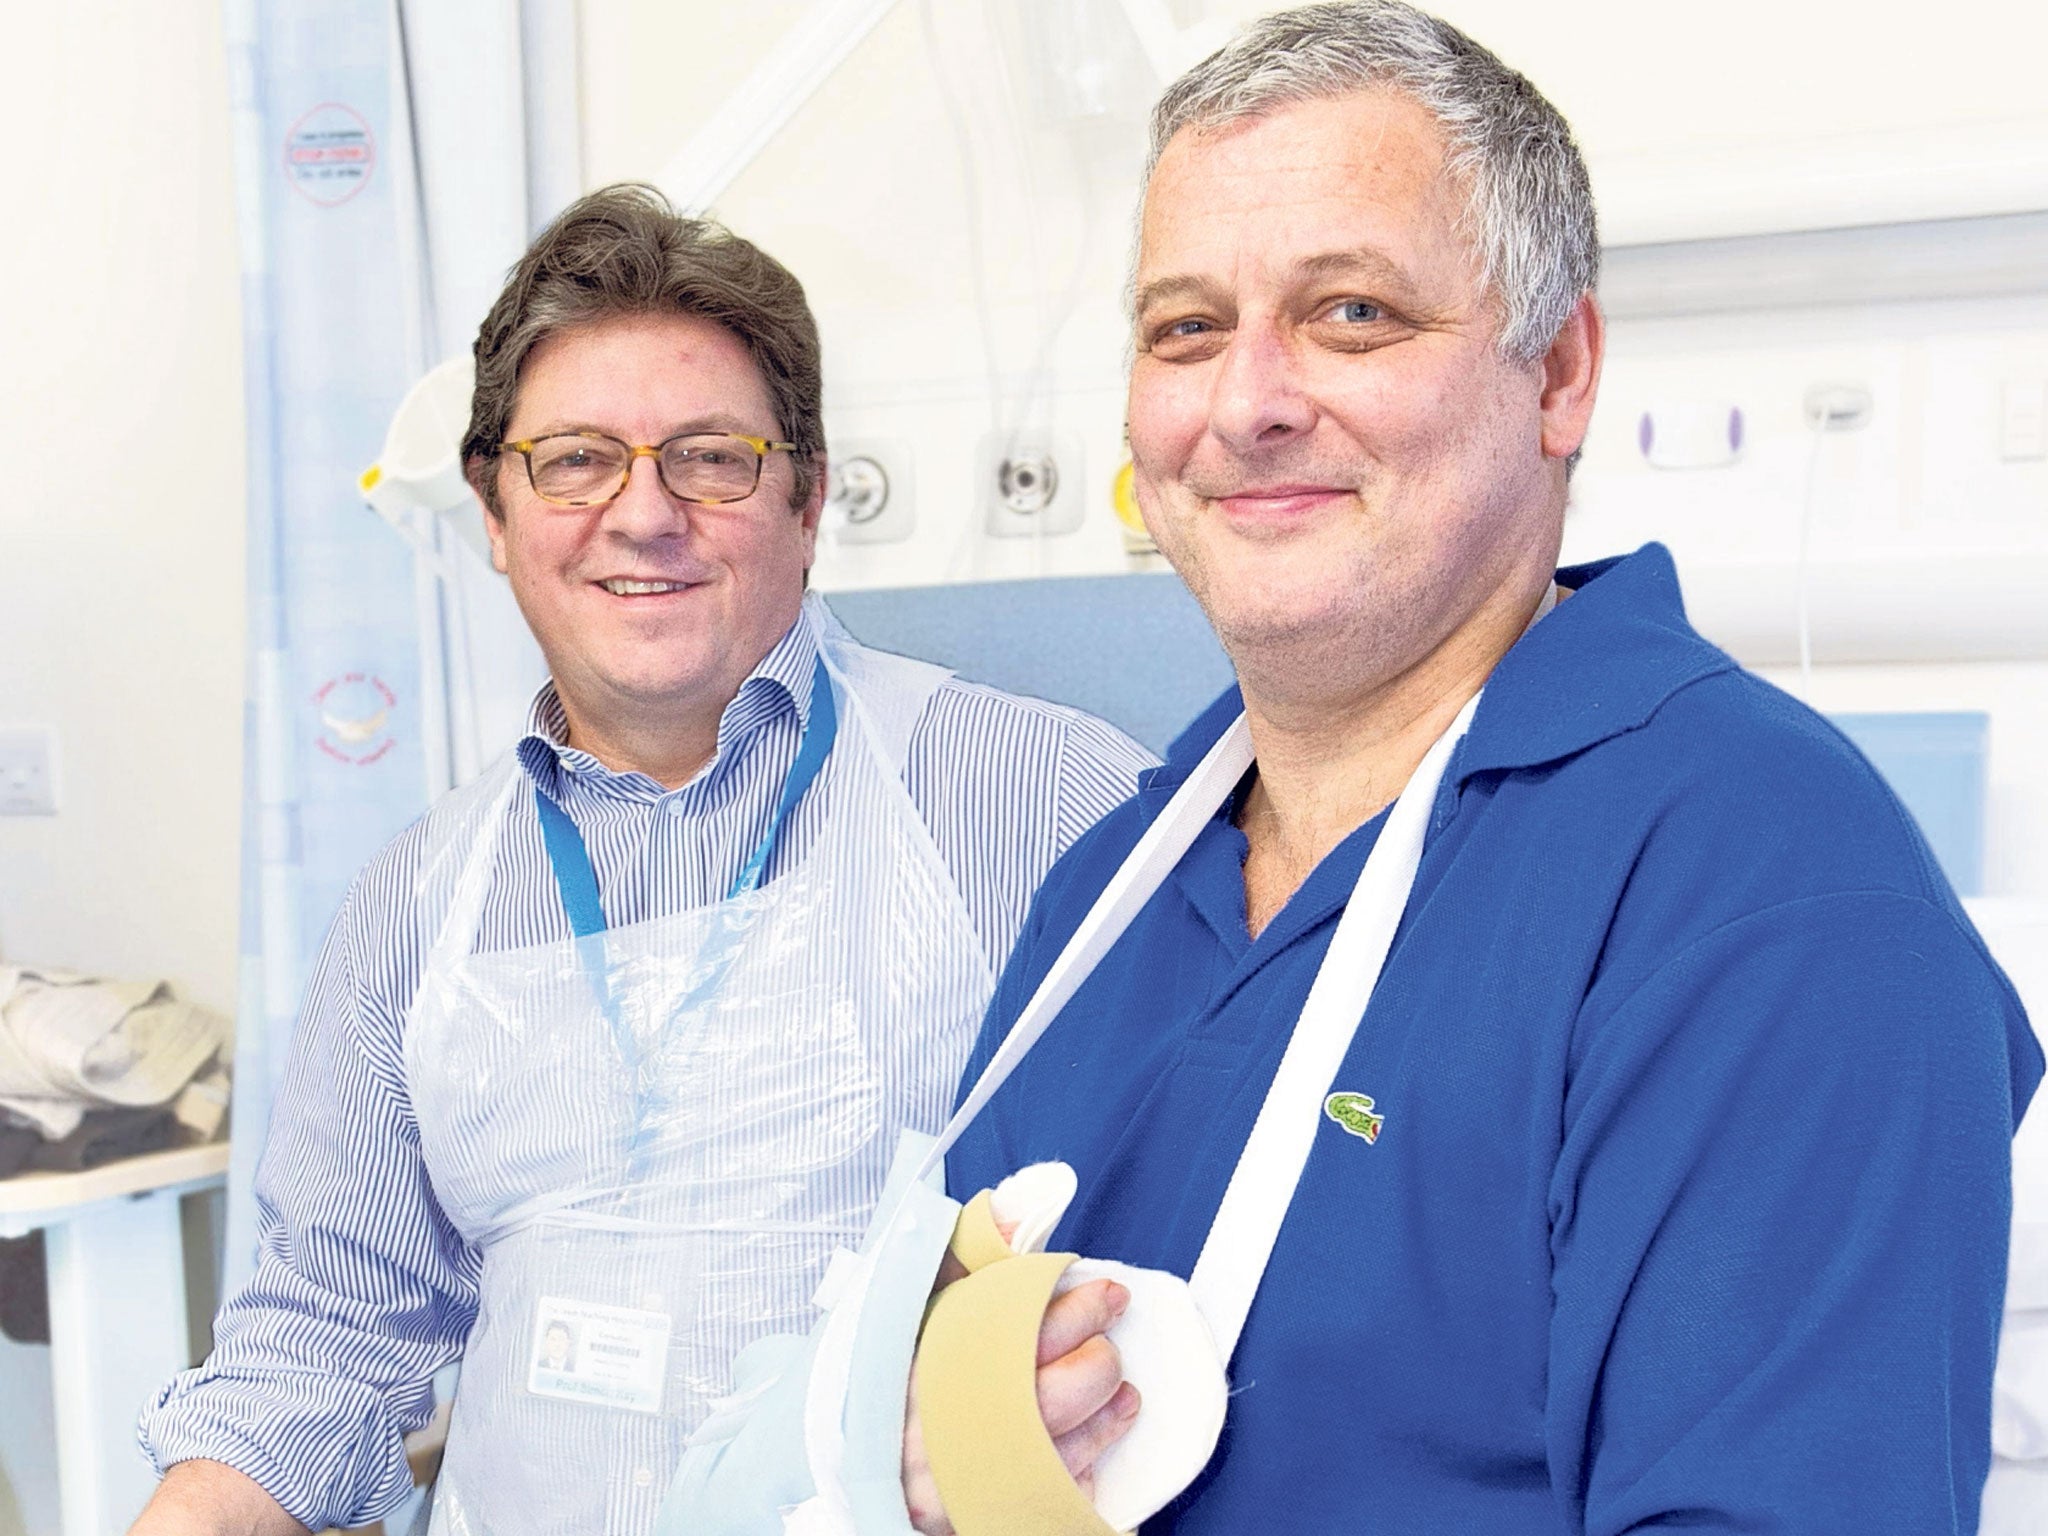 Professor Simon Kay, far left, with his patient, Mark Cahill, the first person in the UK to have a hand transplant